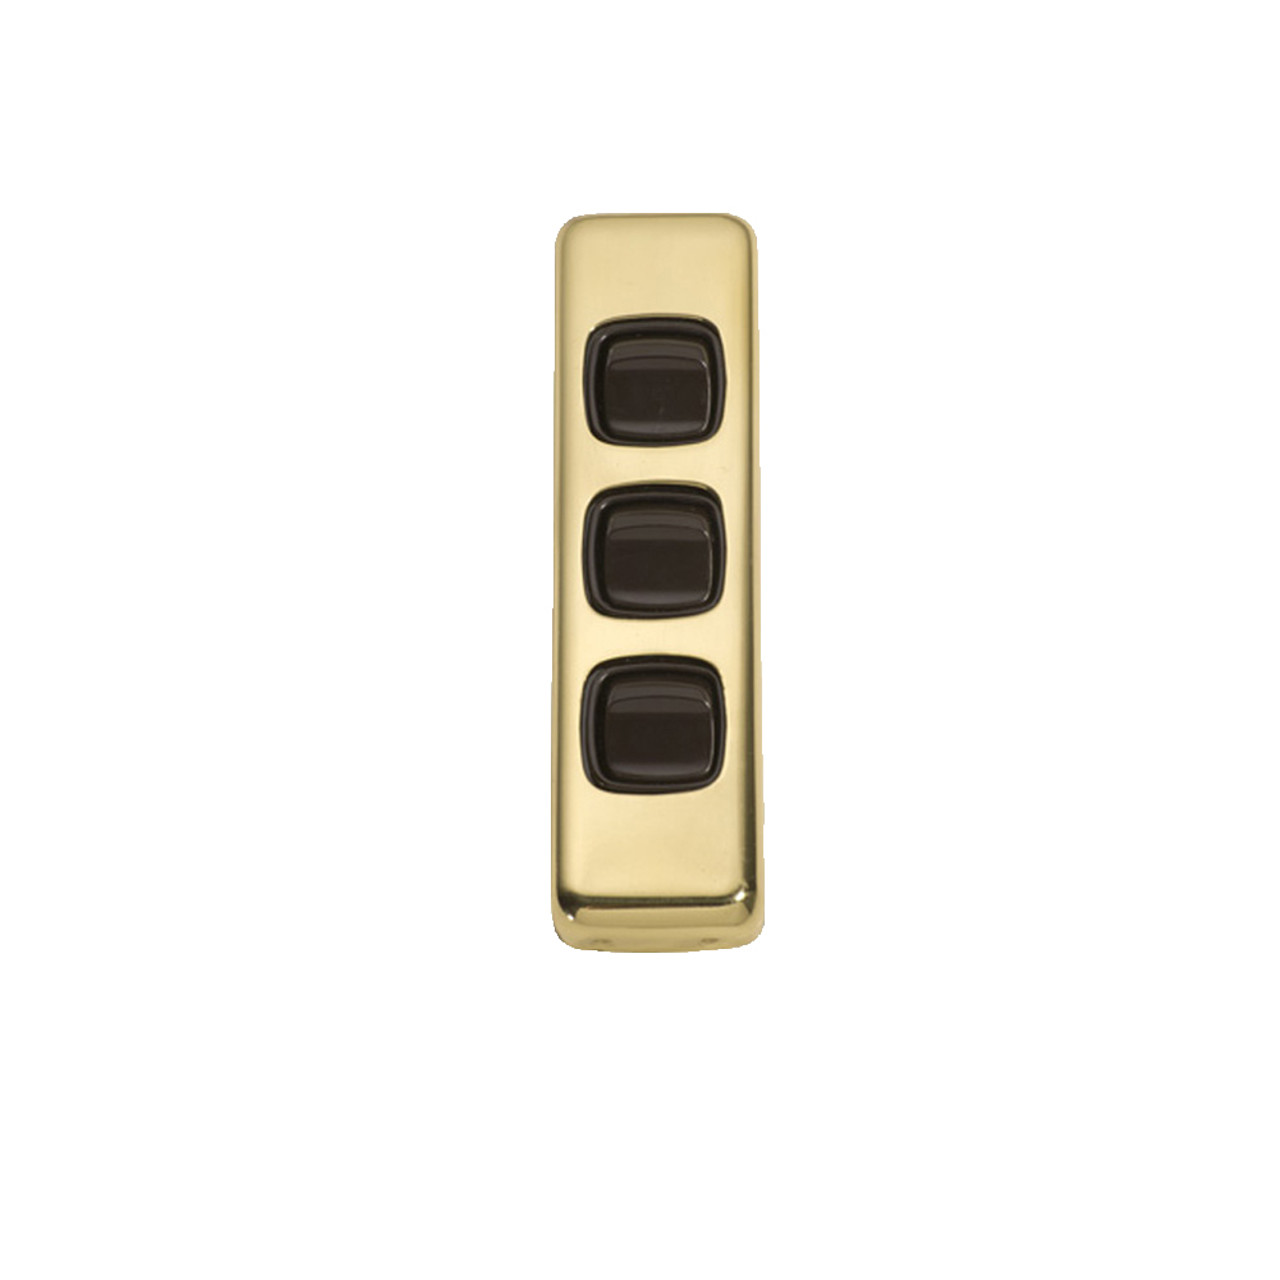 Classic 3 Gang Flat Plate Heritage Architrave Light Switches - Polished Brass Plate with Brown Rocker